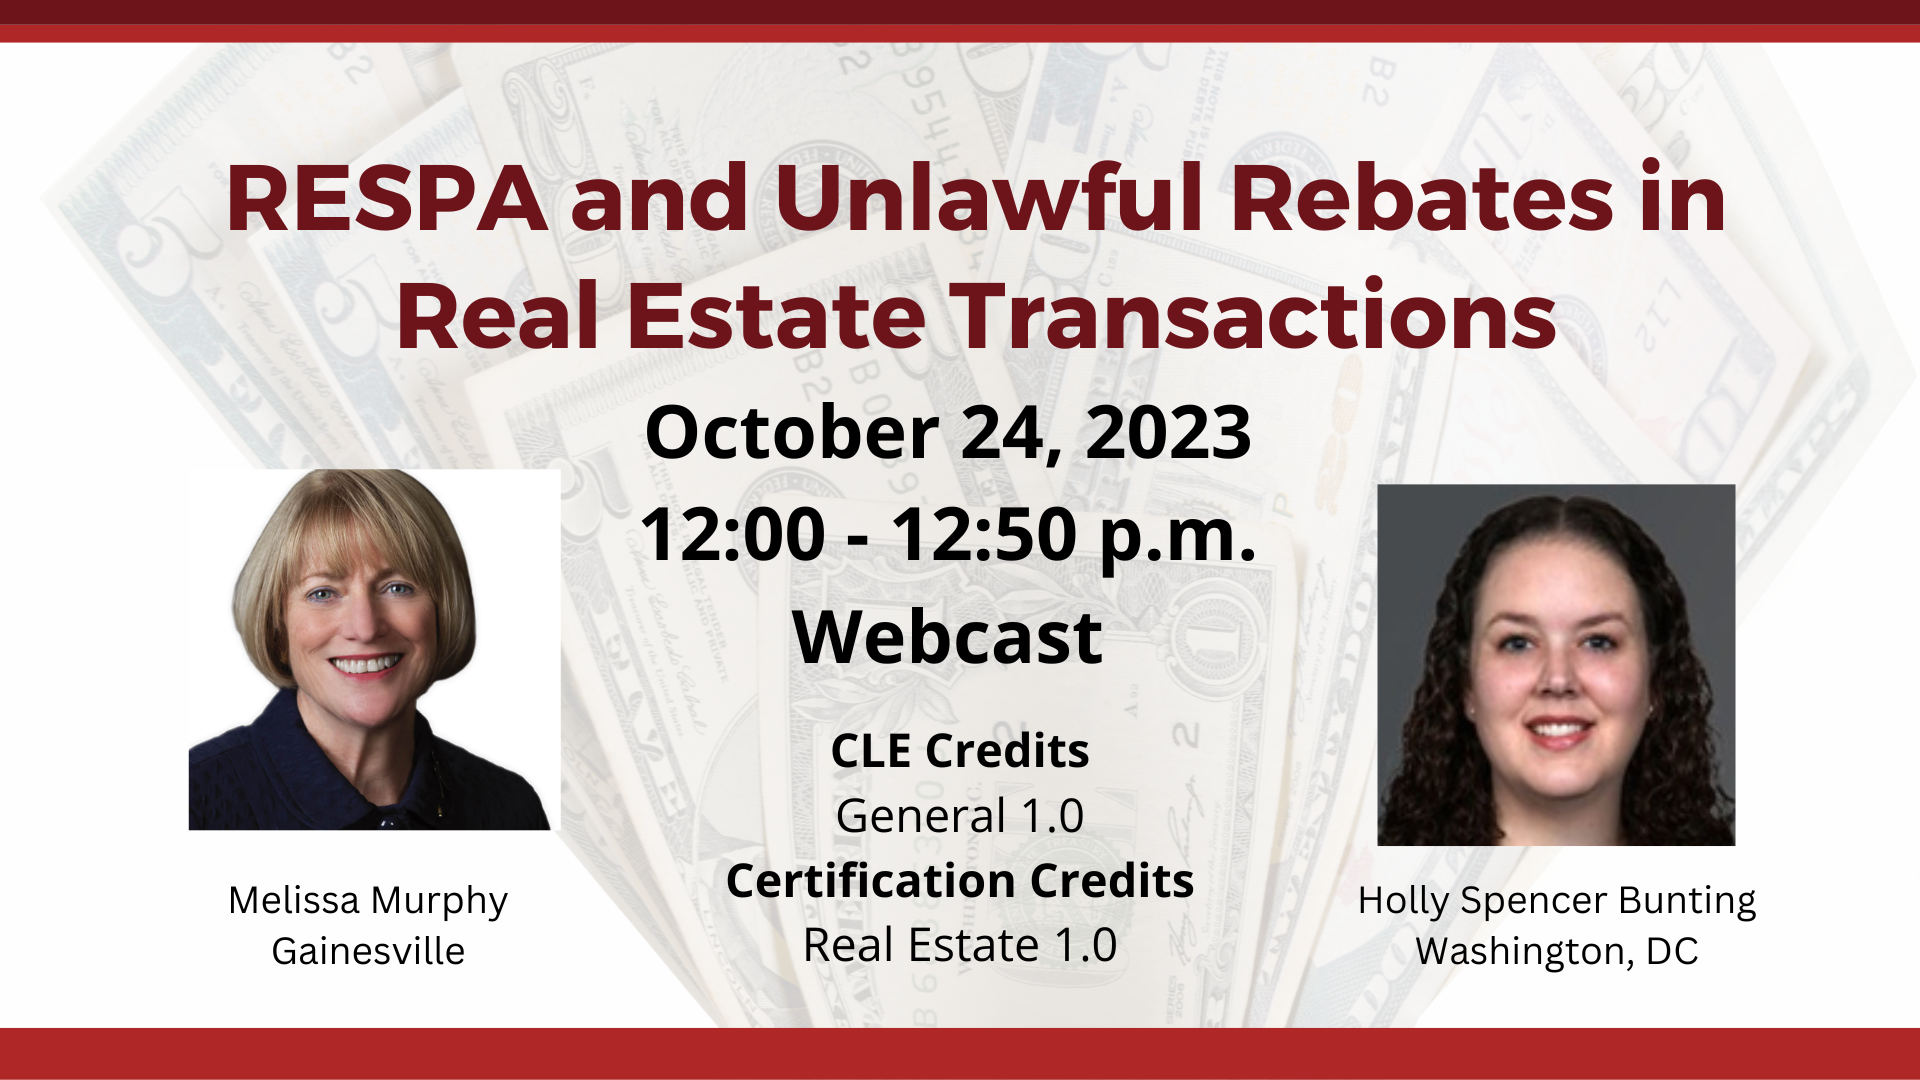 RESPA and Unlawful Rebates in Real Estate Transactions